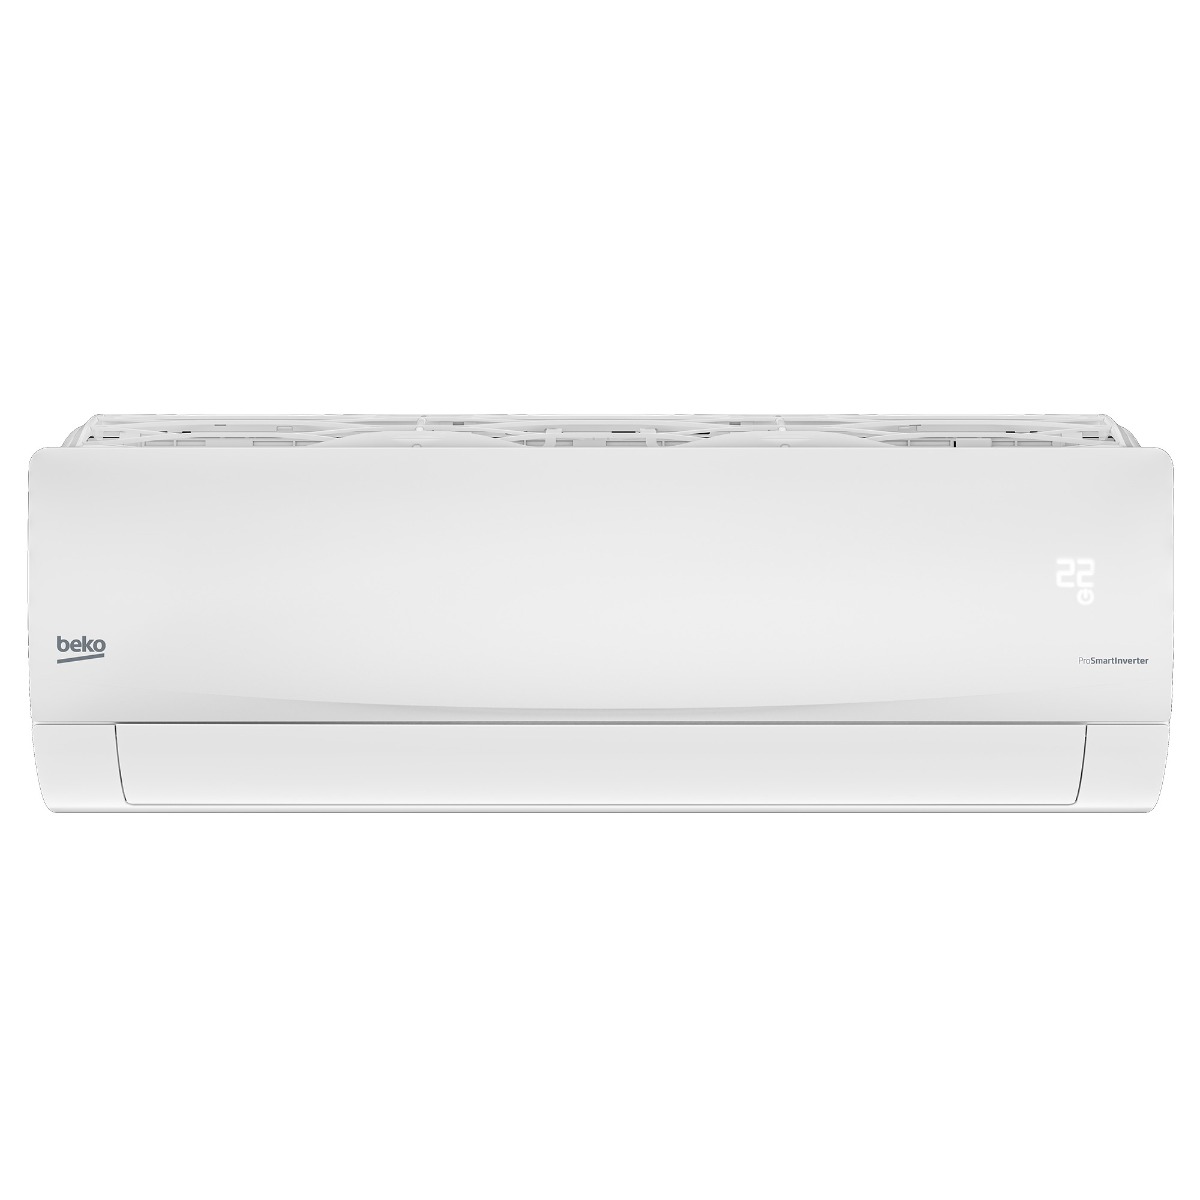 Beko Split Air Conditioner with Inverter , 2.25 HP, Cooling Only, White - BICT1820